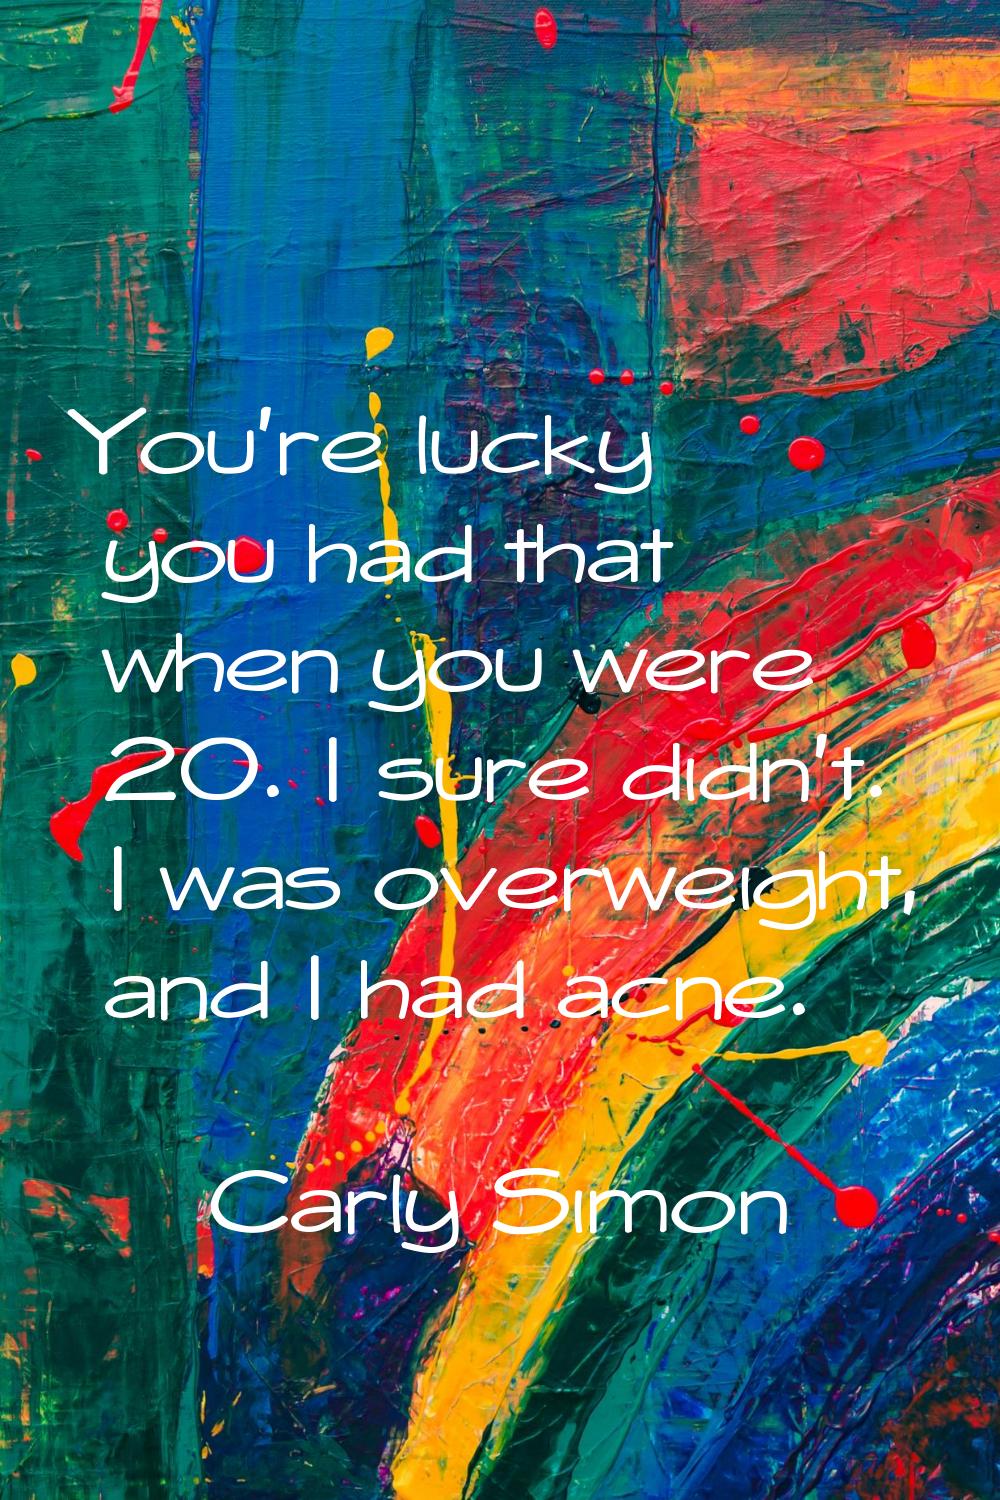 You're lucky you had that when you were 20. I sure didn't. I was overweight, and I had acne.